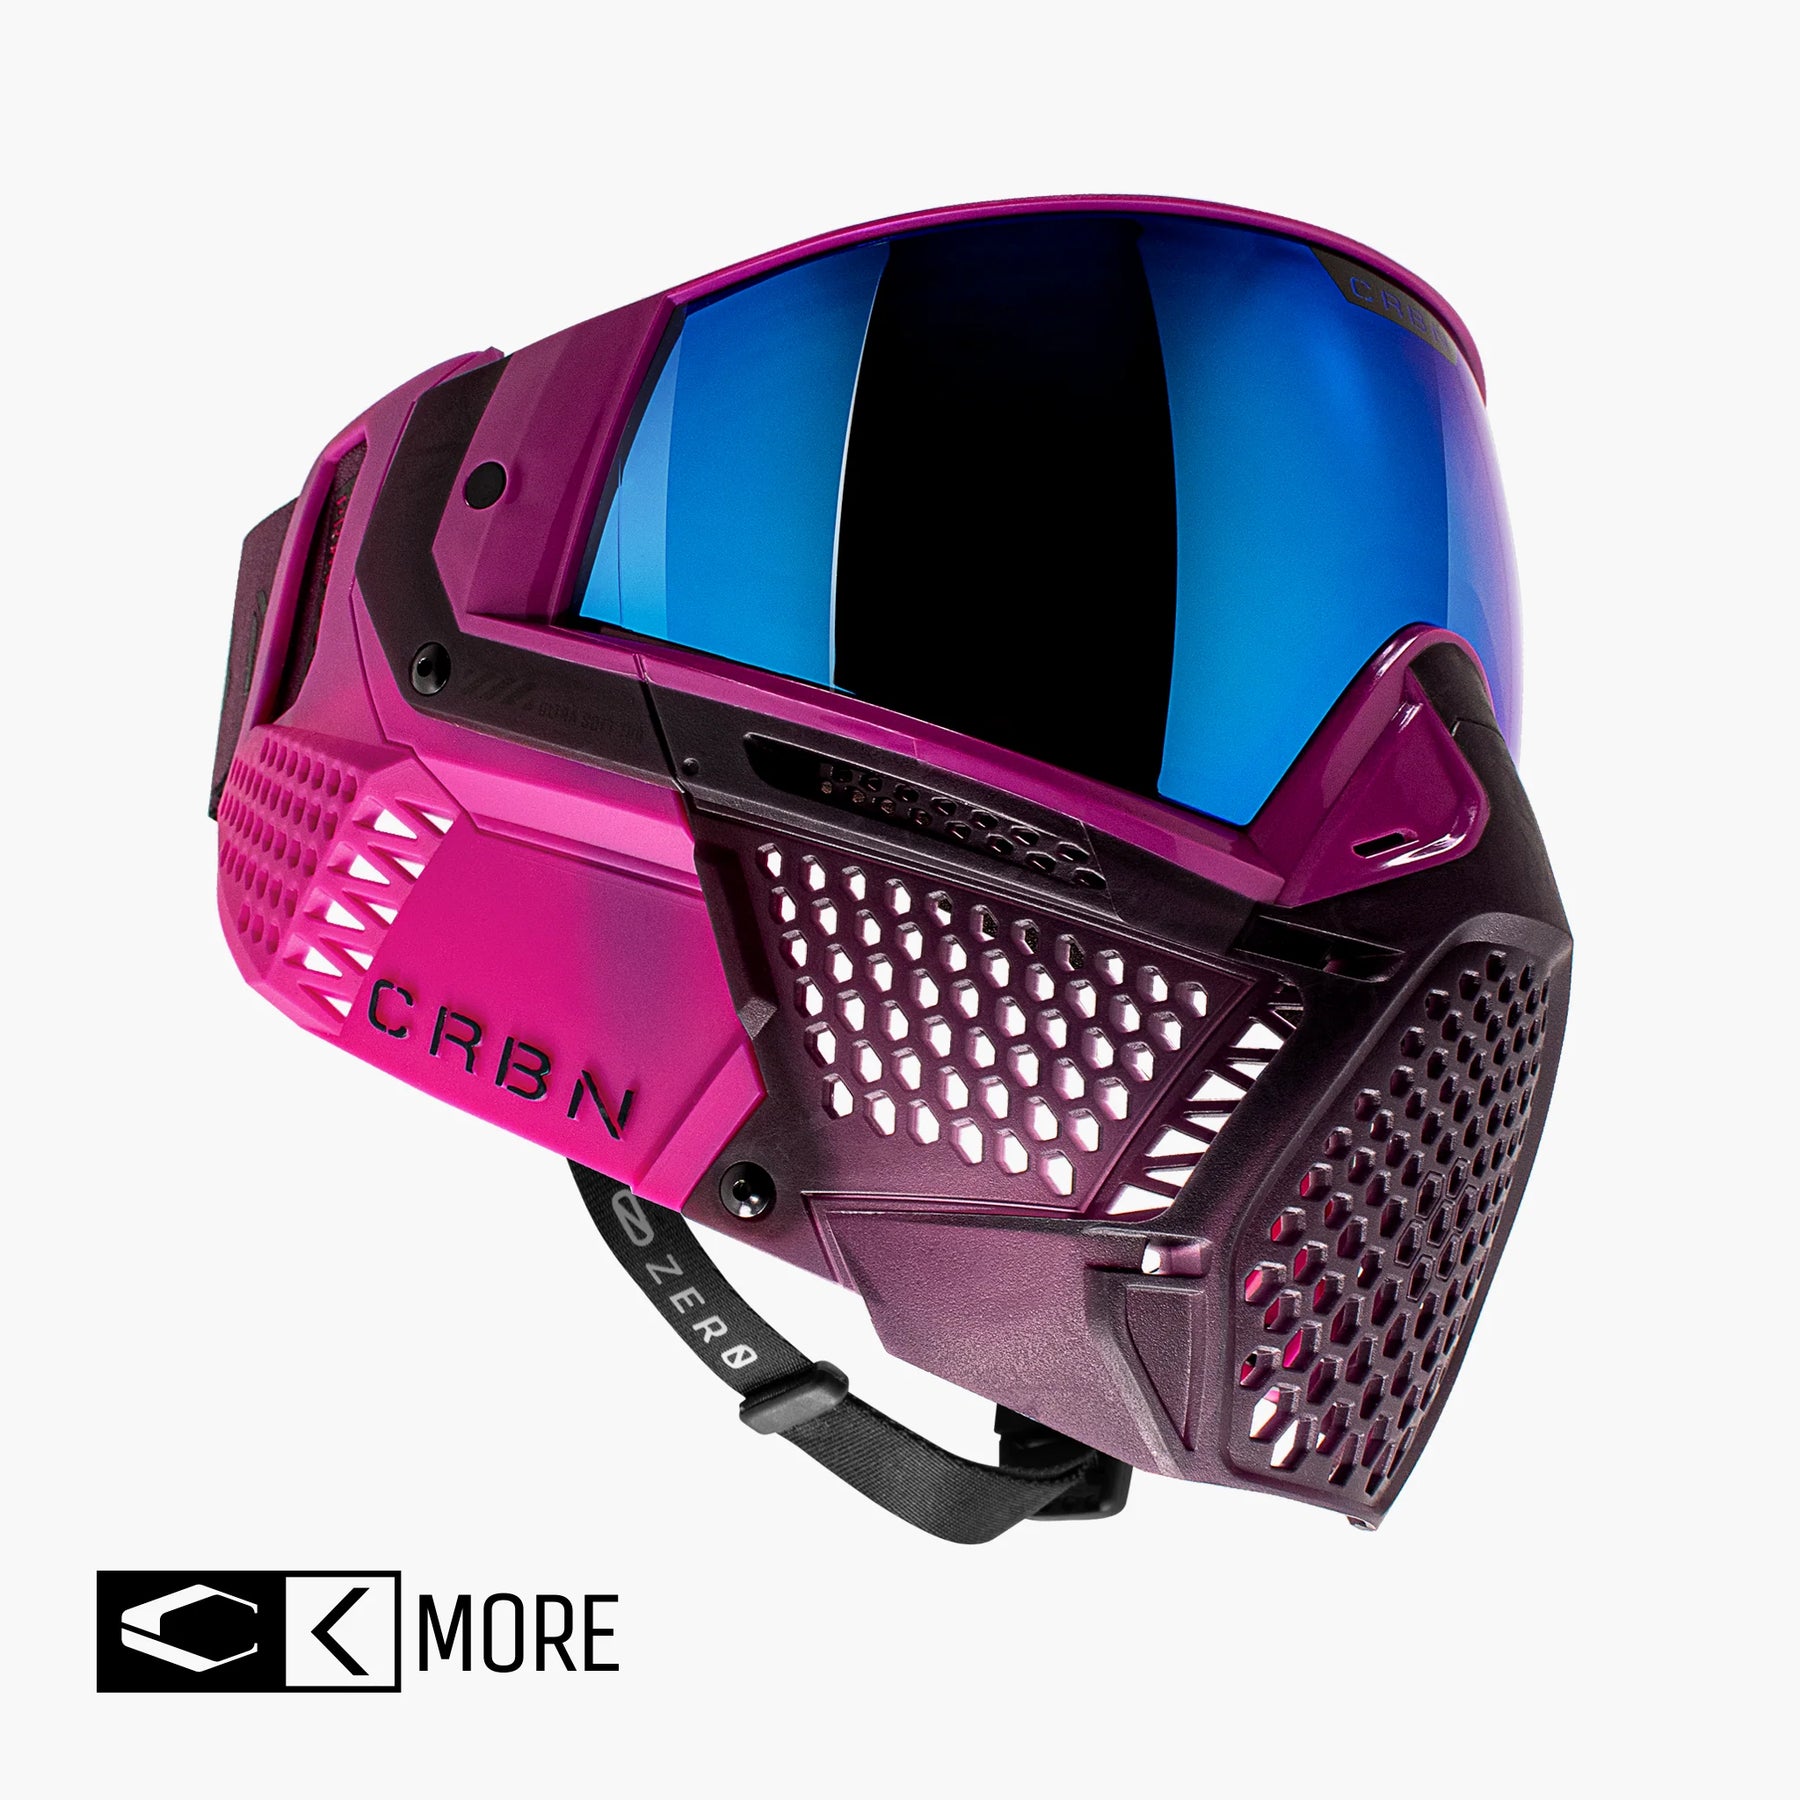 CRBN pro violet - Less/More coverage - Paintball Goggles